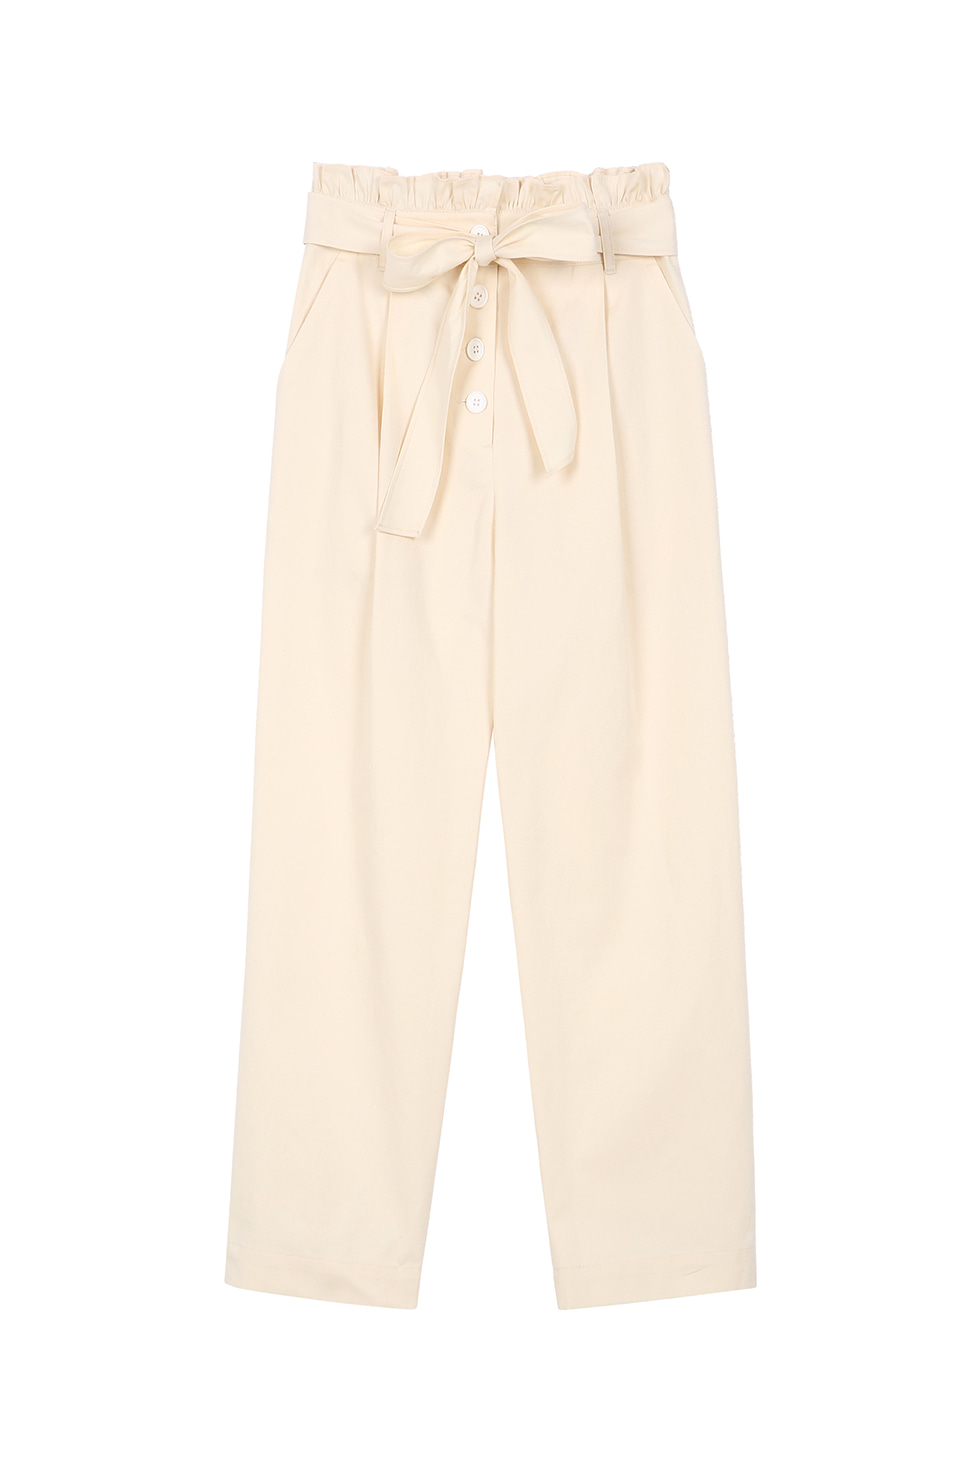 BUTTON UP SHIRRING PANTS - IVORY